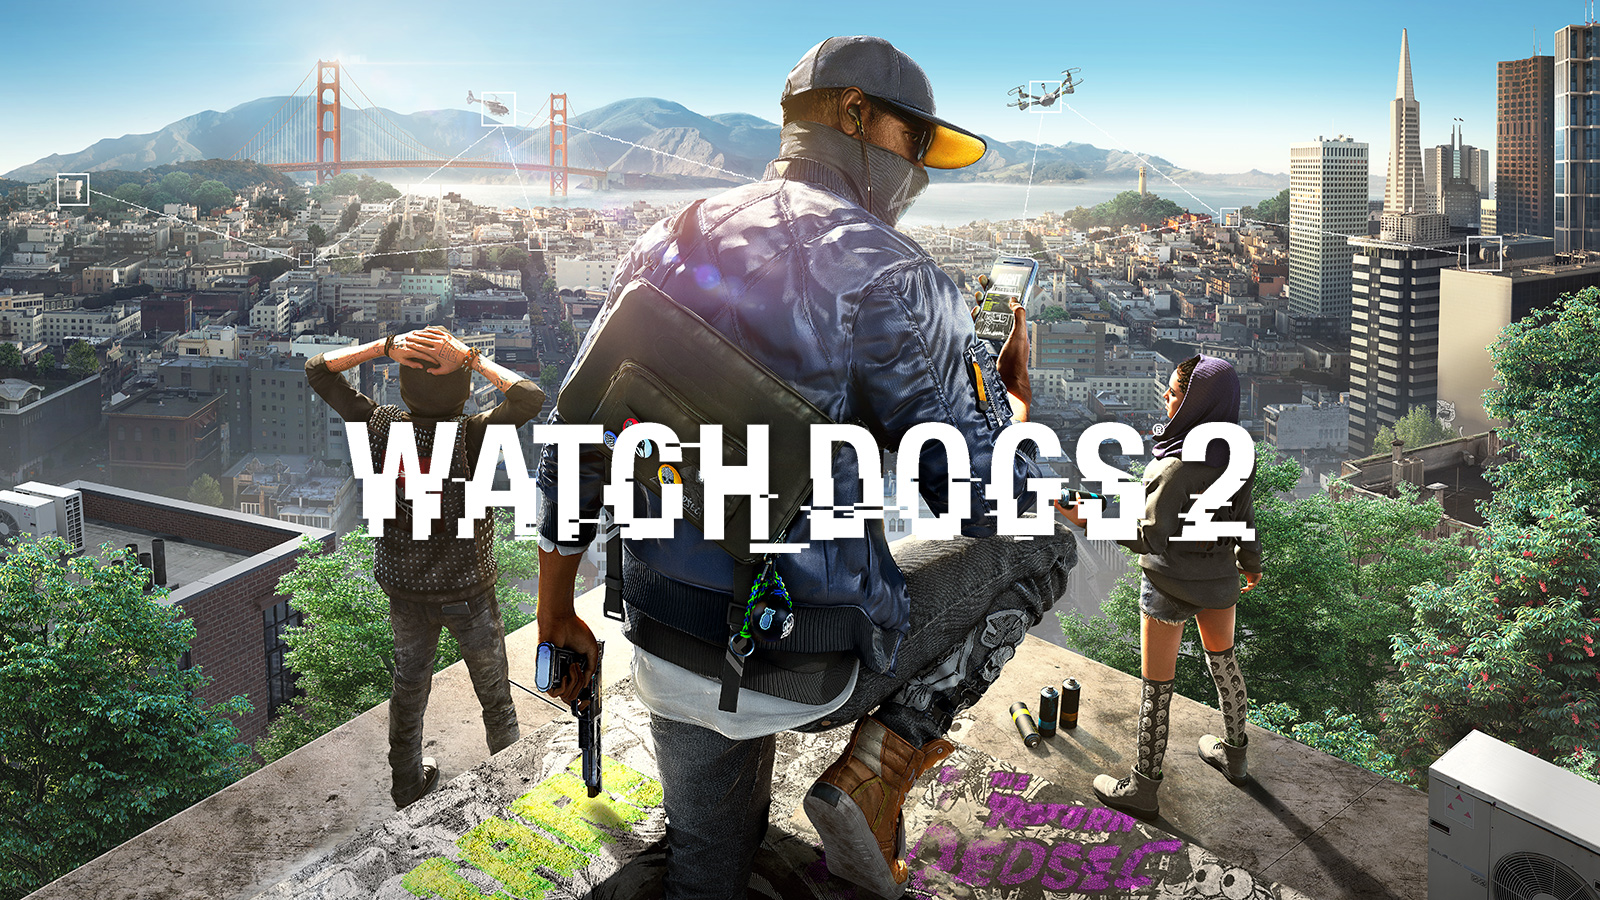 Creep Celebrity frokost Video Game Review: Watch Dogs 2 | Goonhammer